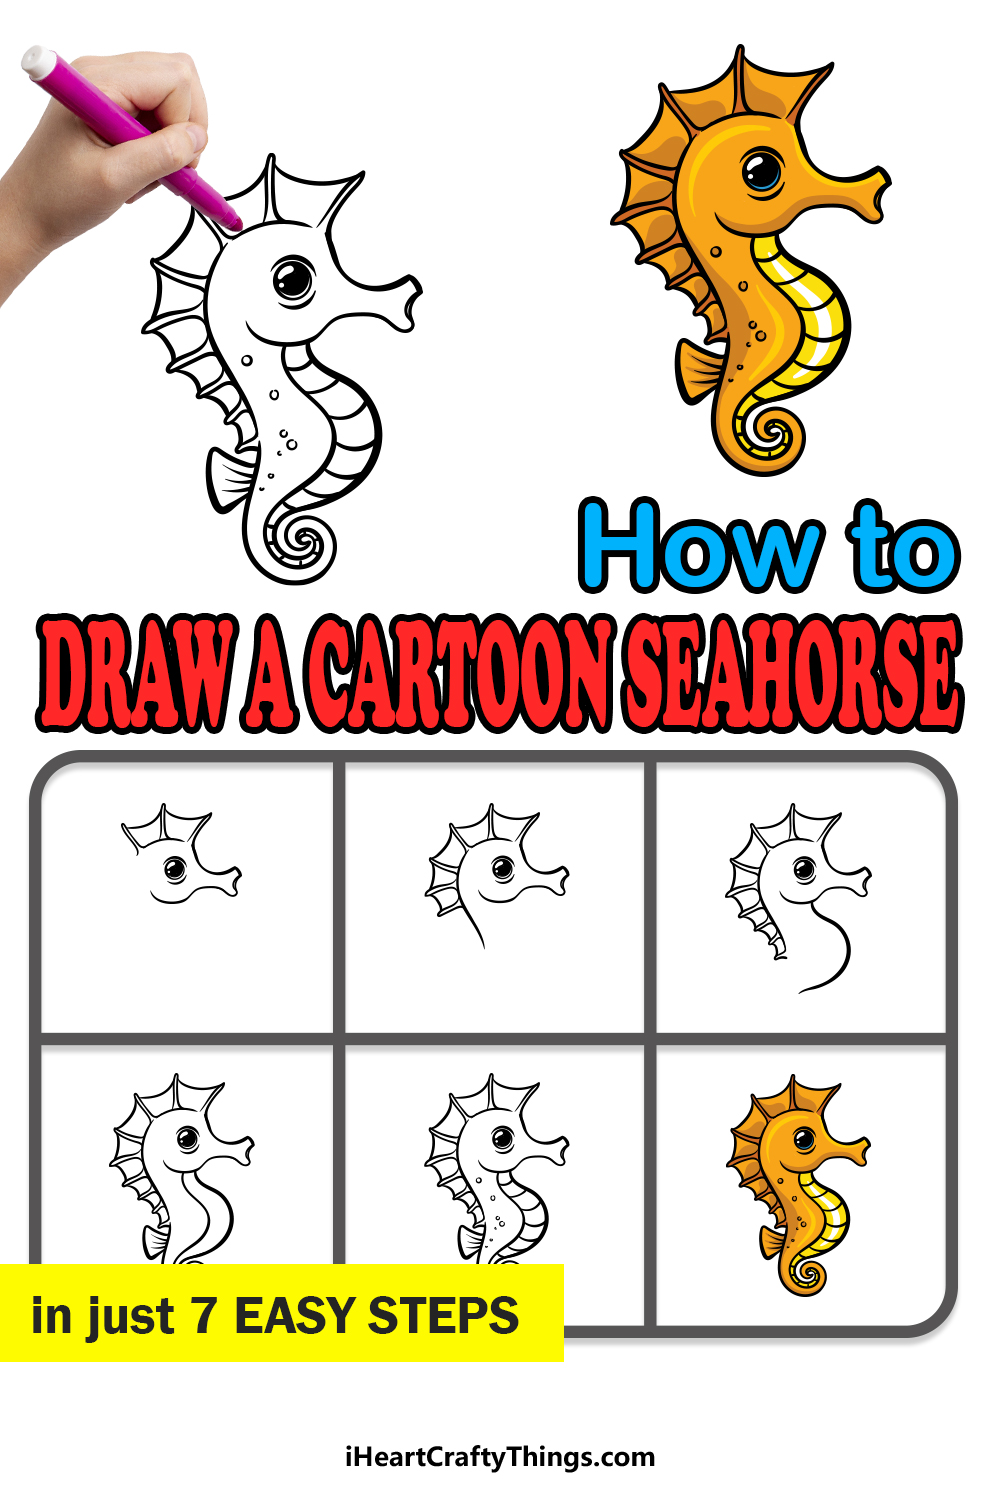 how to draw a cartoon seahorse in 7 easy steps